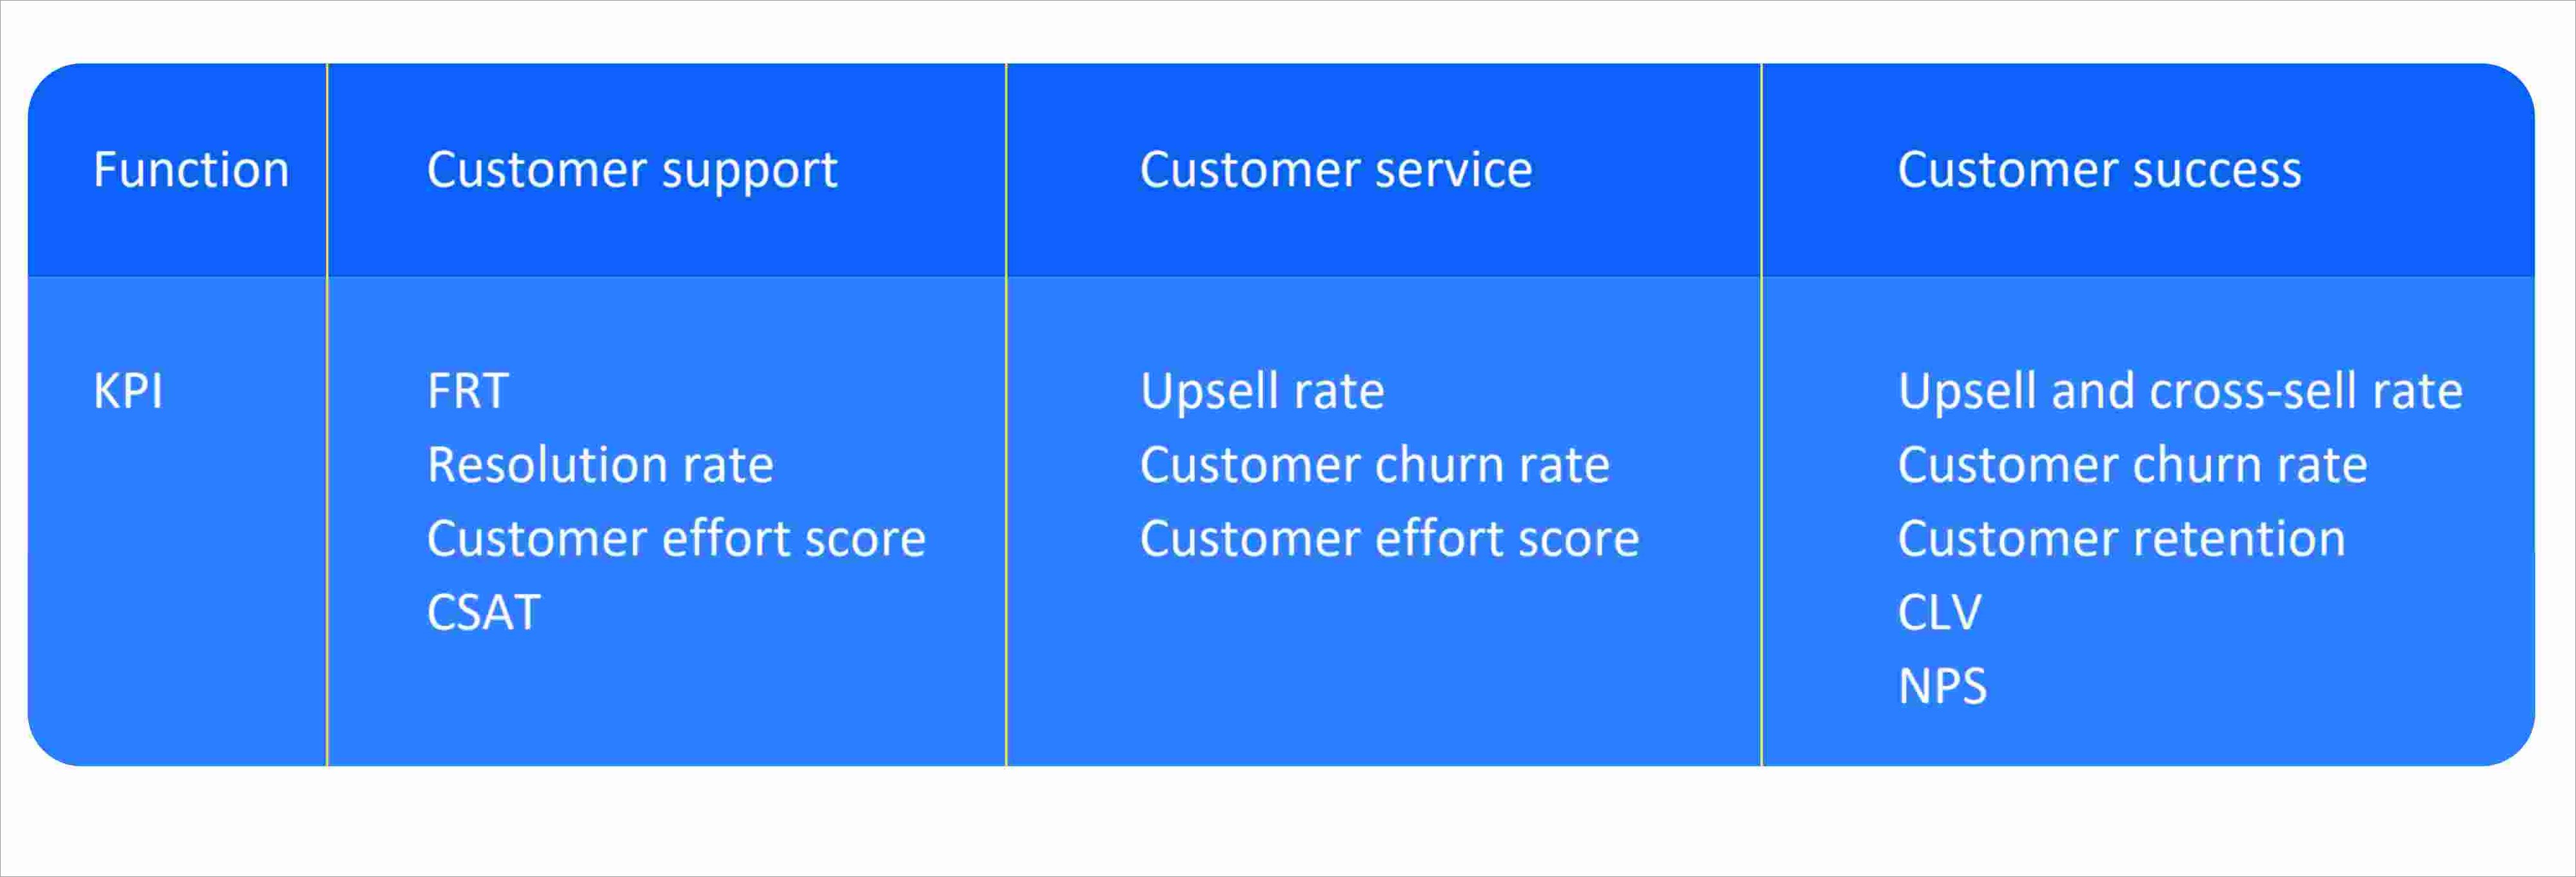 A summary of the KPIs for measuring customer support, service and success.